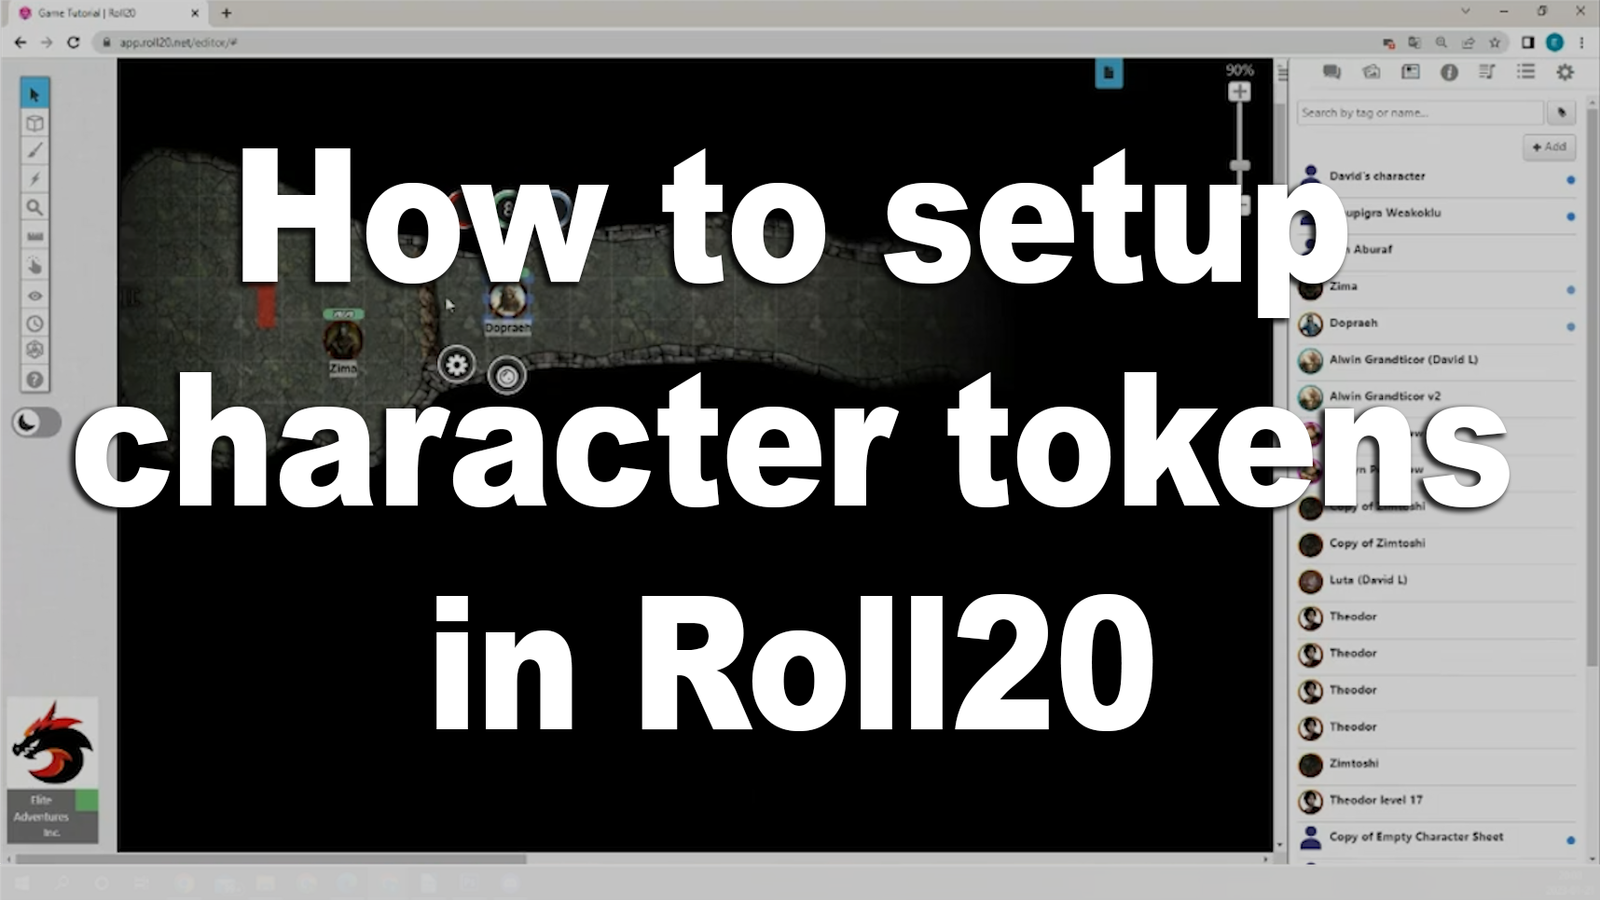 How to setup character tokens in Roll20